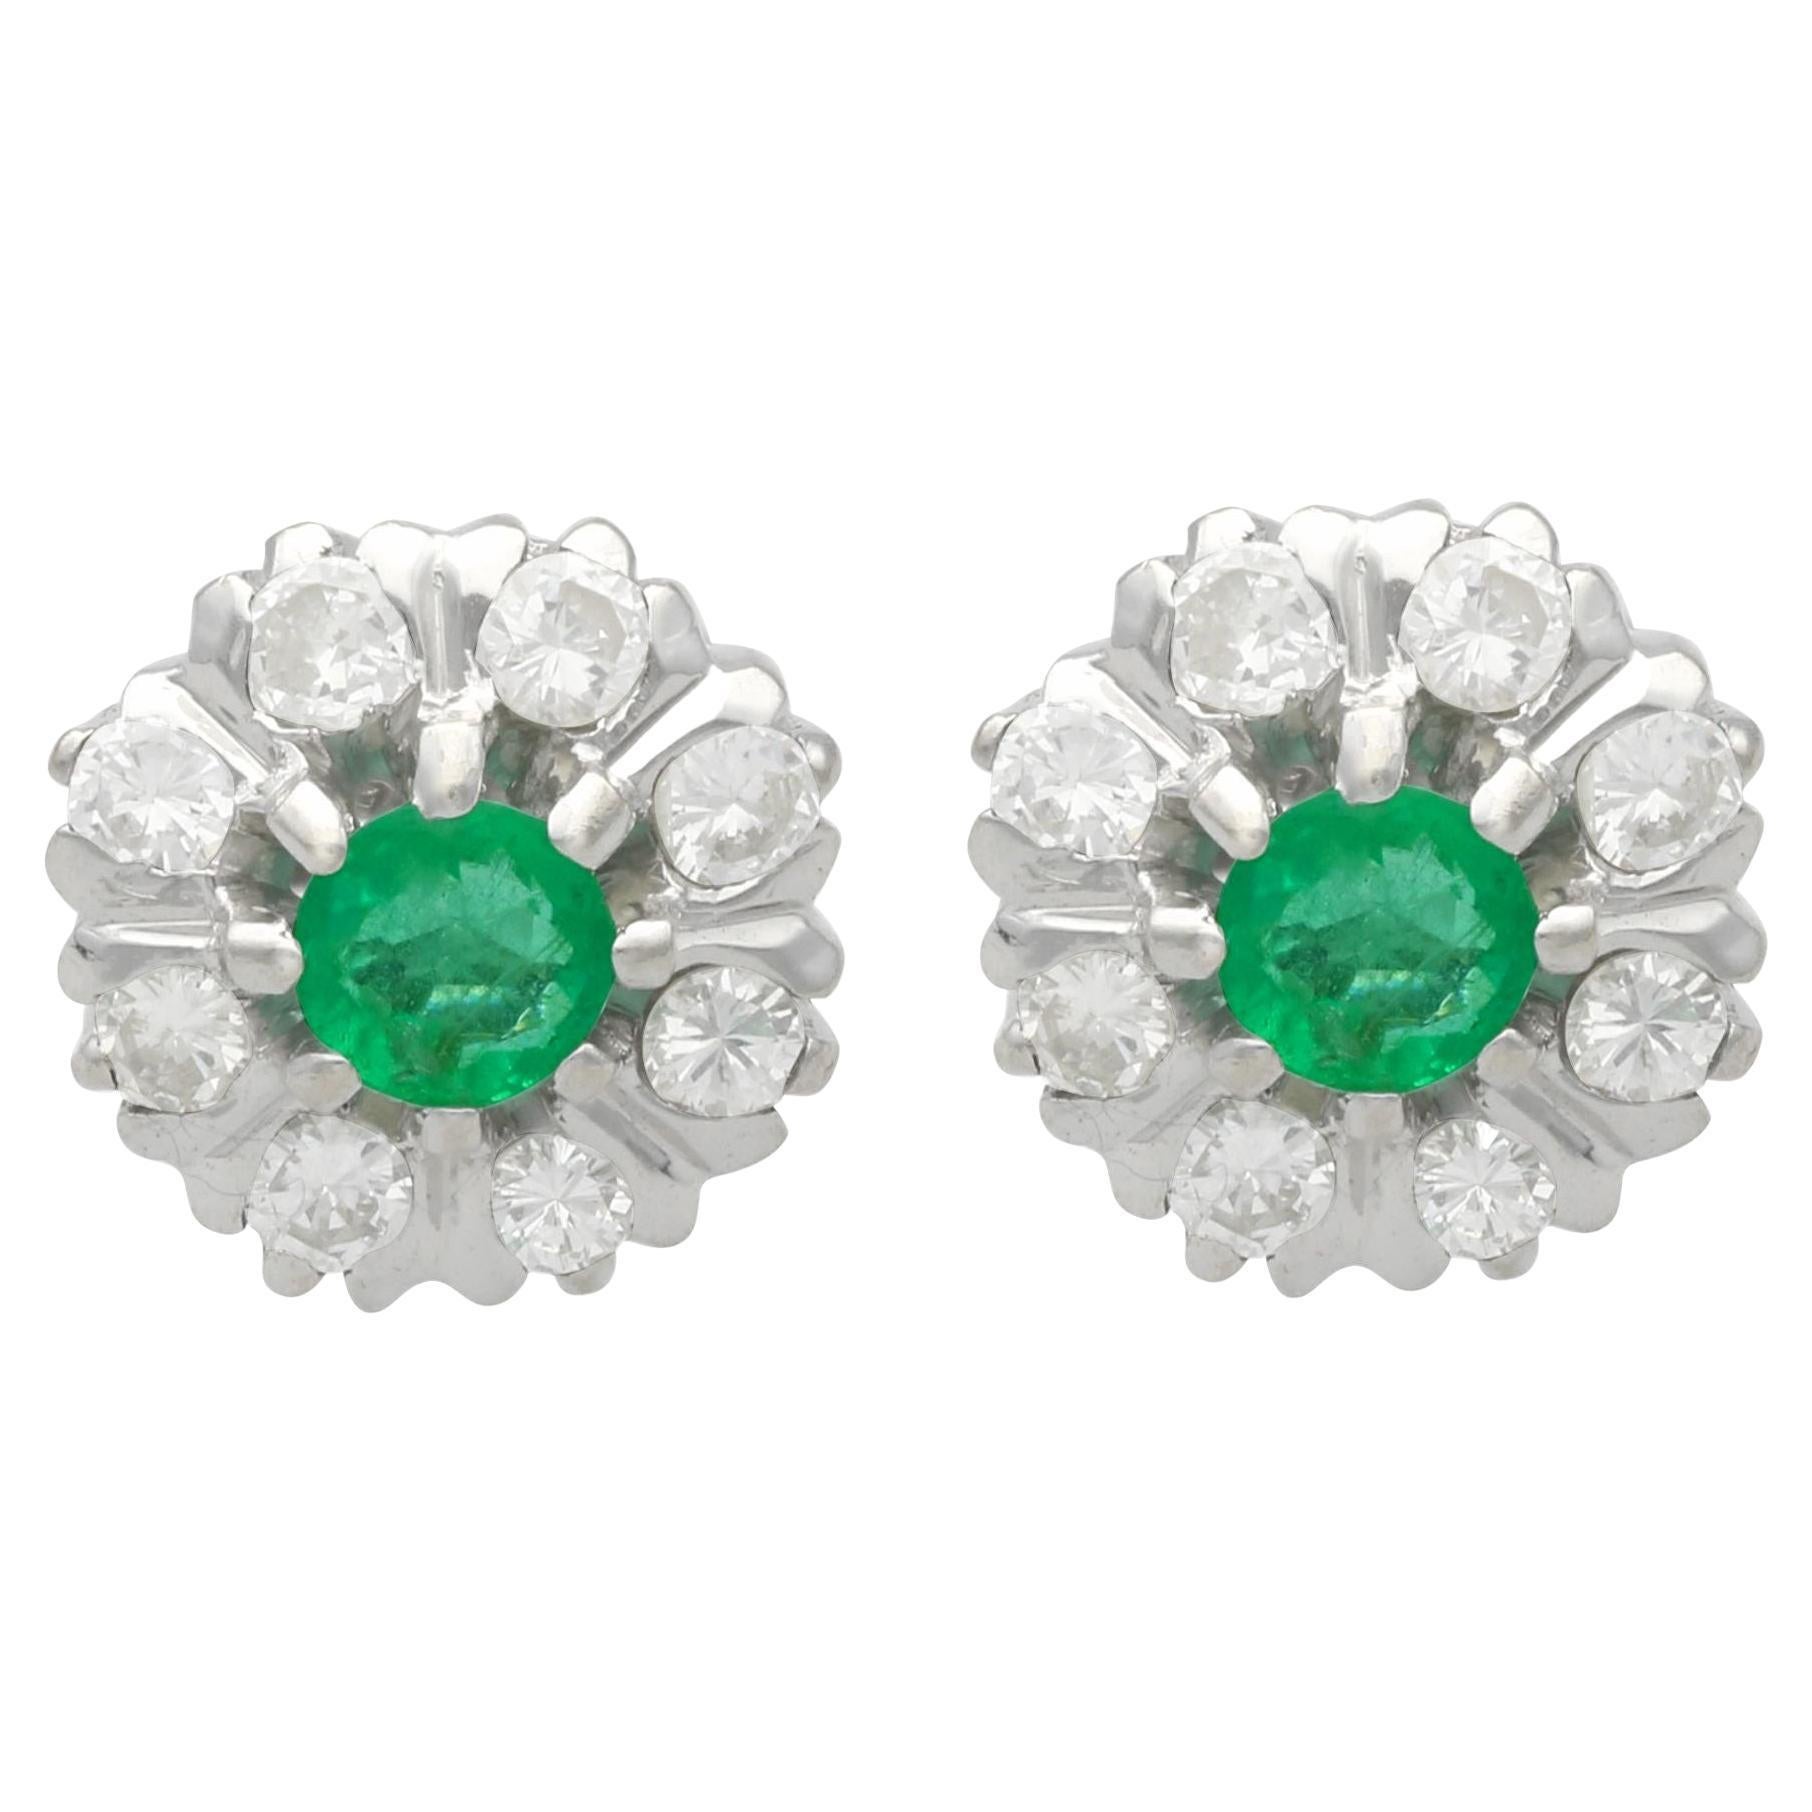 Vintage 0.56 Carat Emerald and 0.65 Carat Diamond White Gold Cluster Earrings For Sale